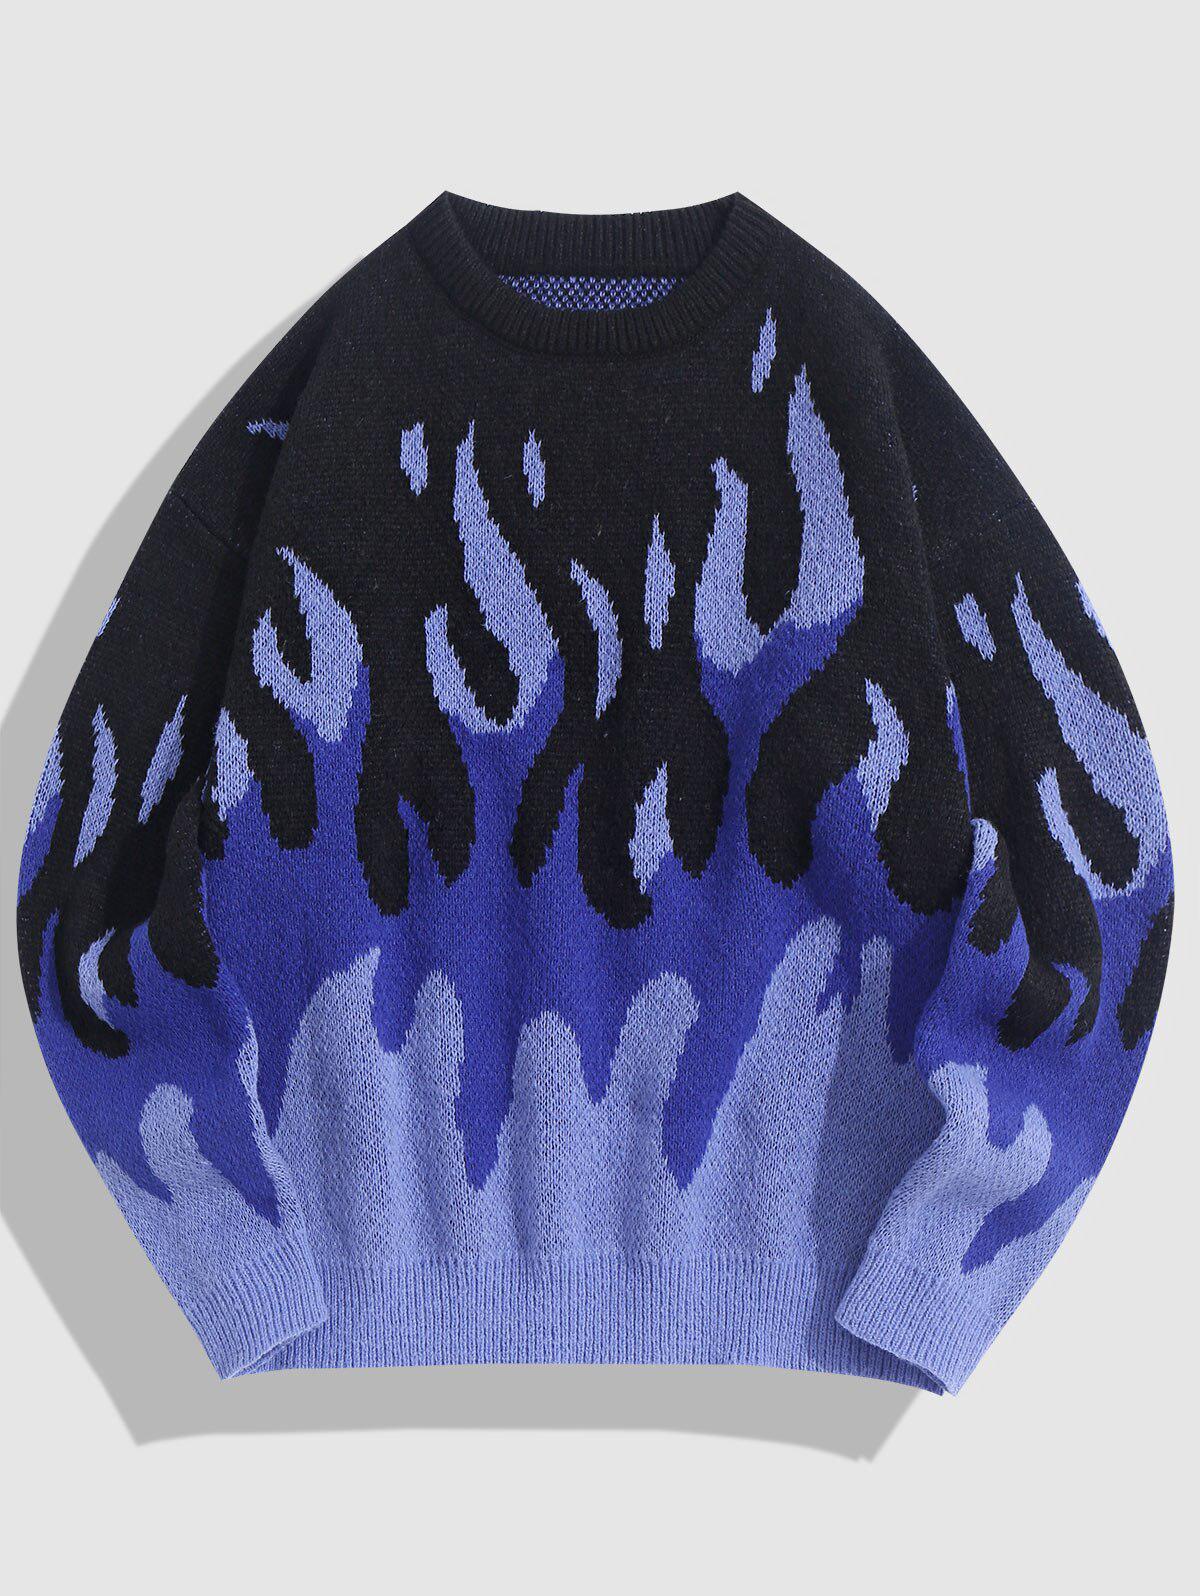 Indie Flame Knitted Sweater-Blue-S-Mauv Studio